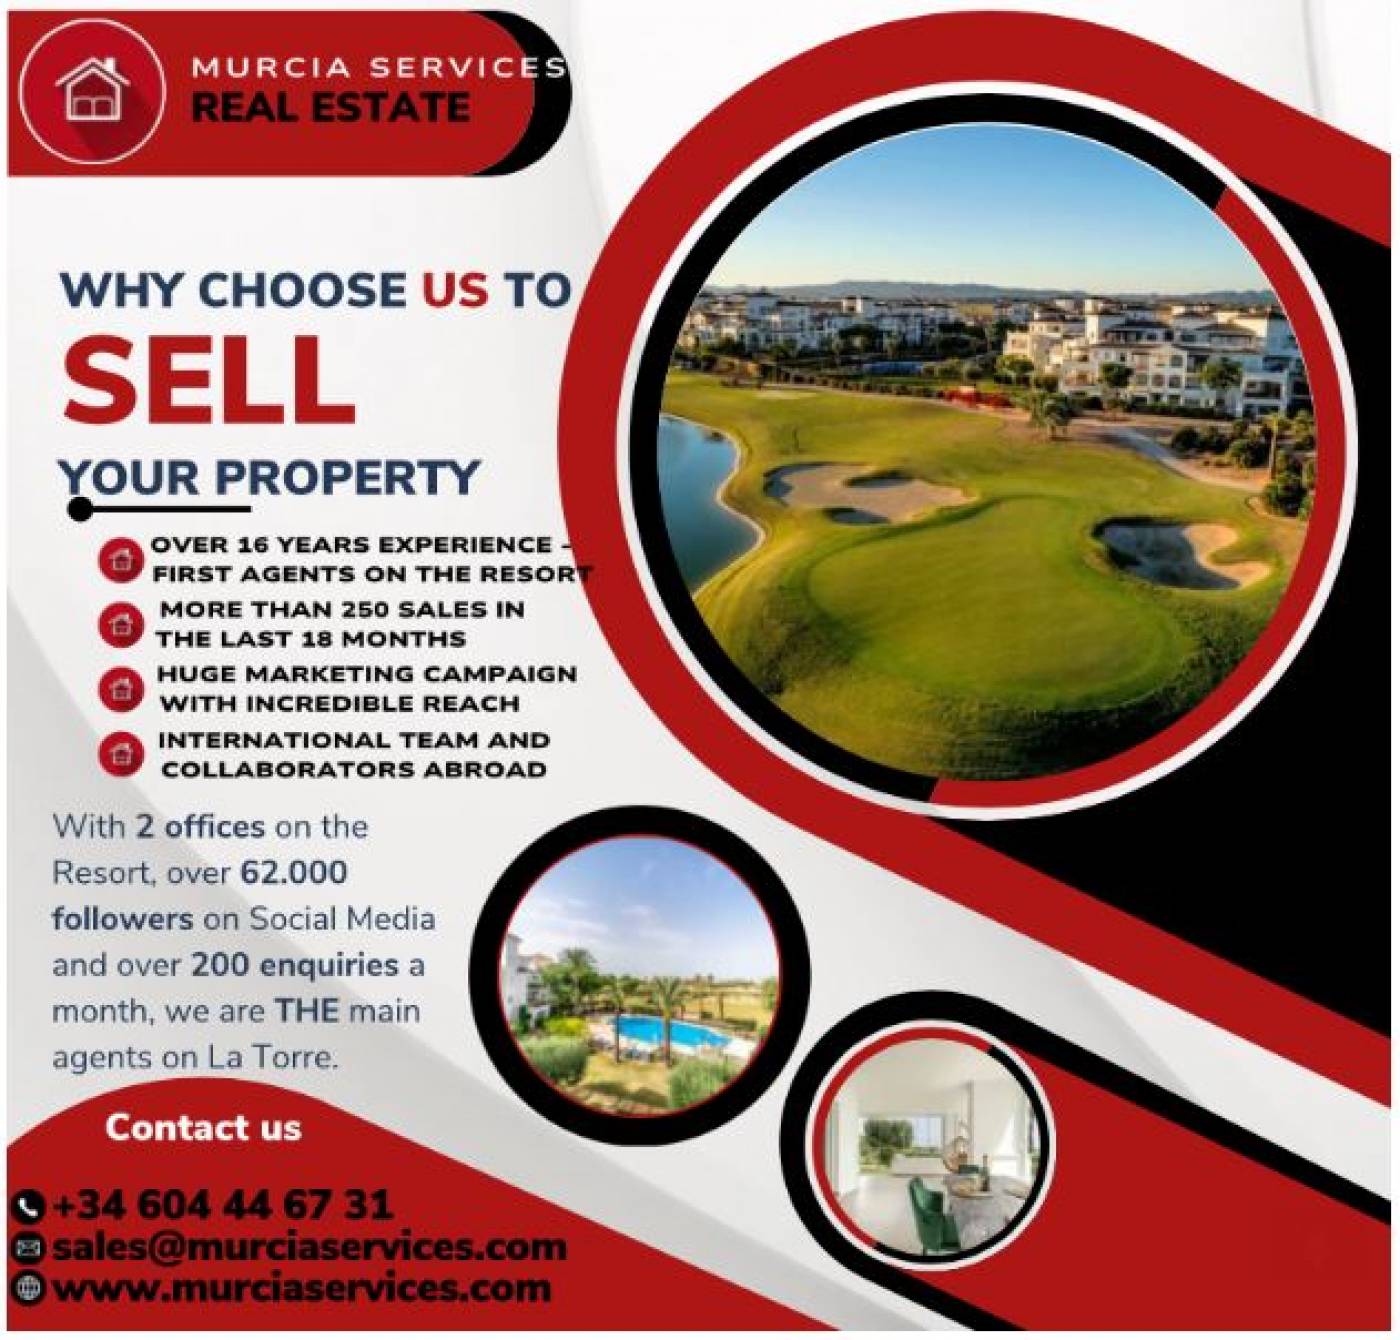 Murcia Services real estate agency on the Costa Cálida and golf resorts